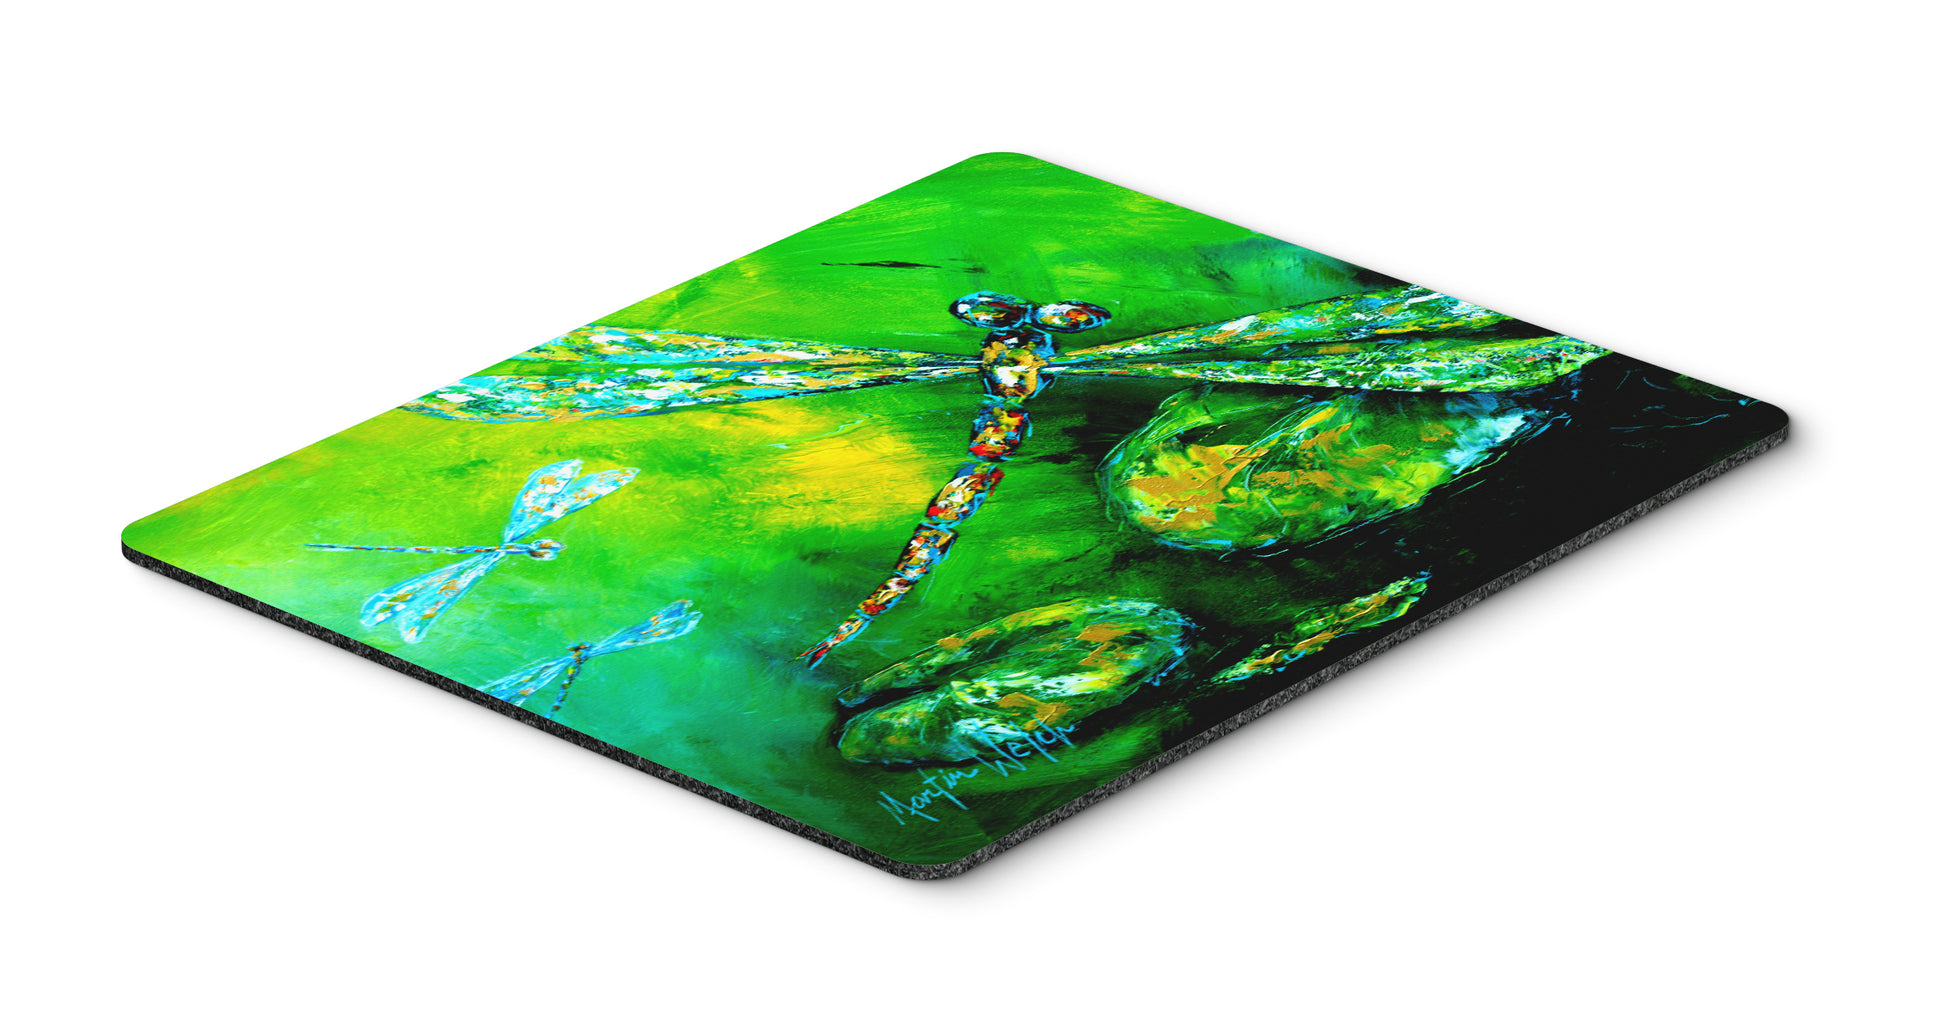 Buy this Dragonfly Summer Flies Mouse Pad, Hot Pad or Trivet